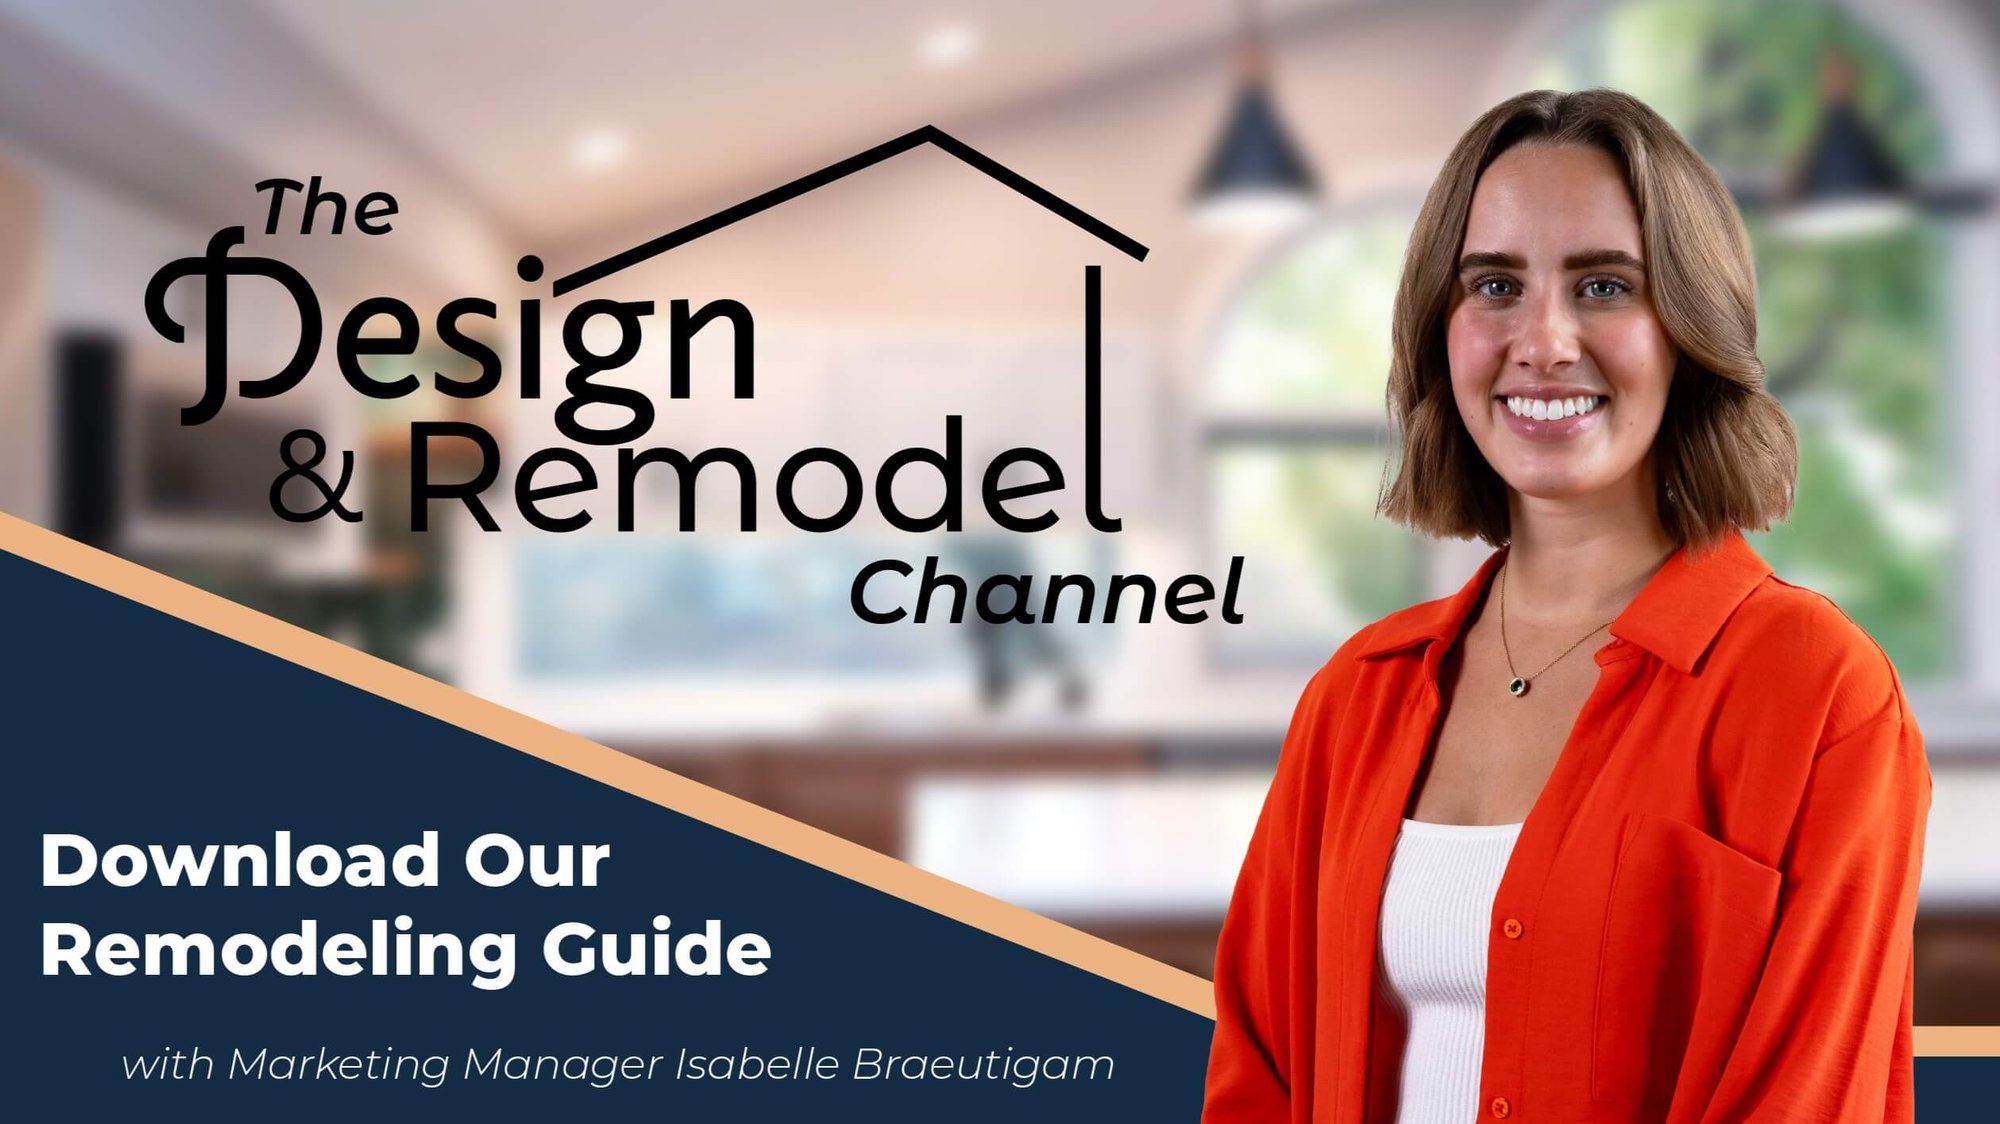 Isabelles Download Our 3 Ways to Remodel Guide